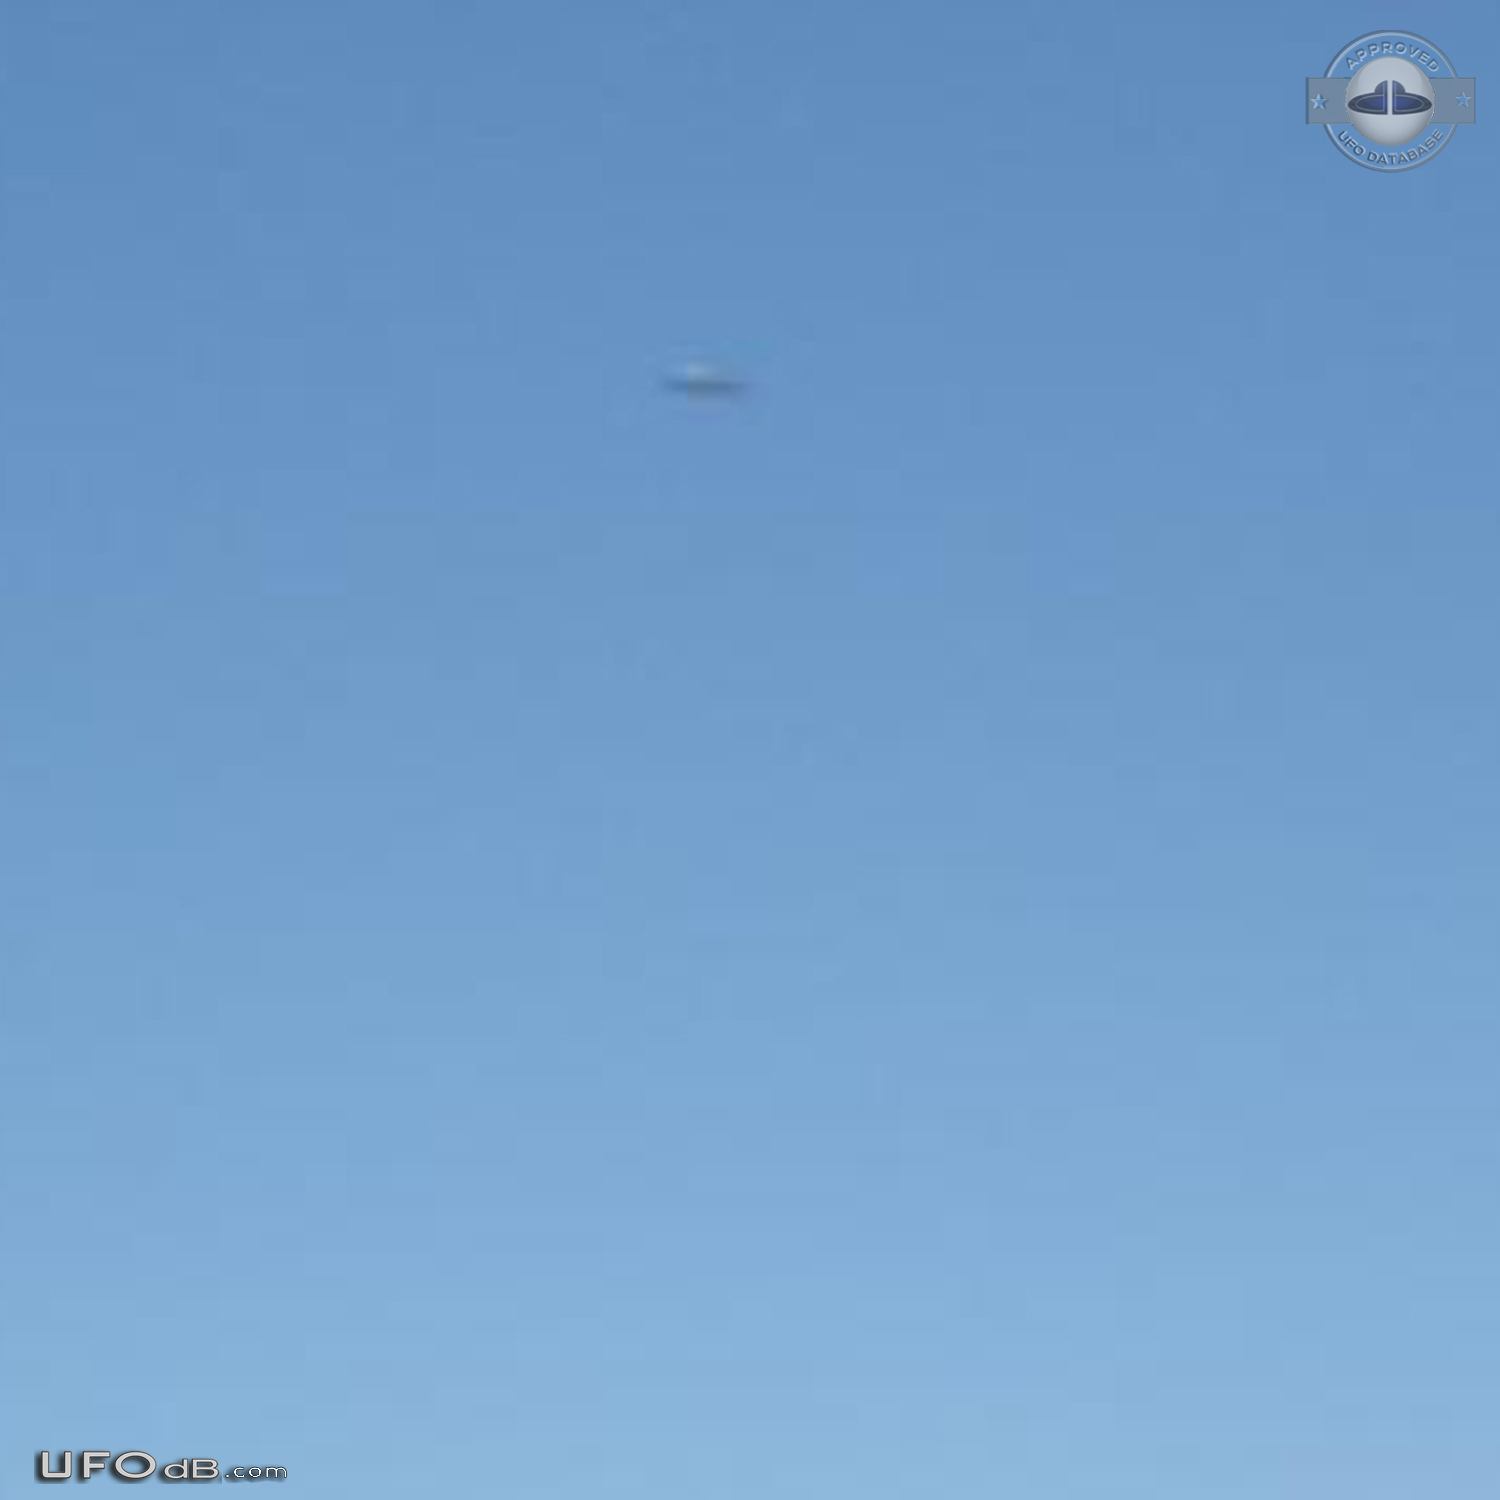 Object captured when taking photo at NATO base site Kandahar Afghanist UFO Picture #748-4